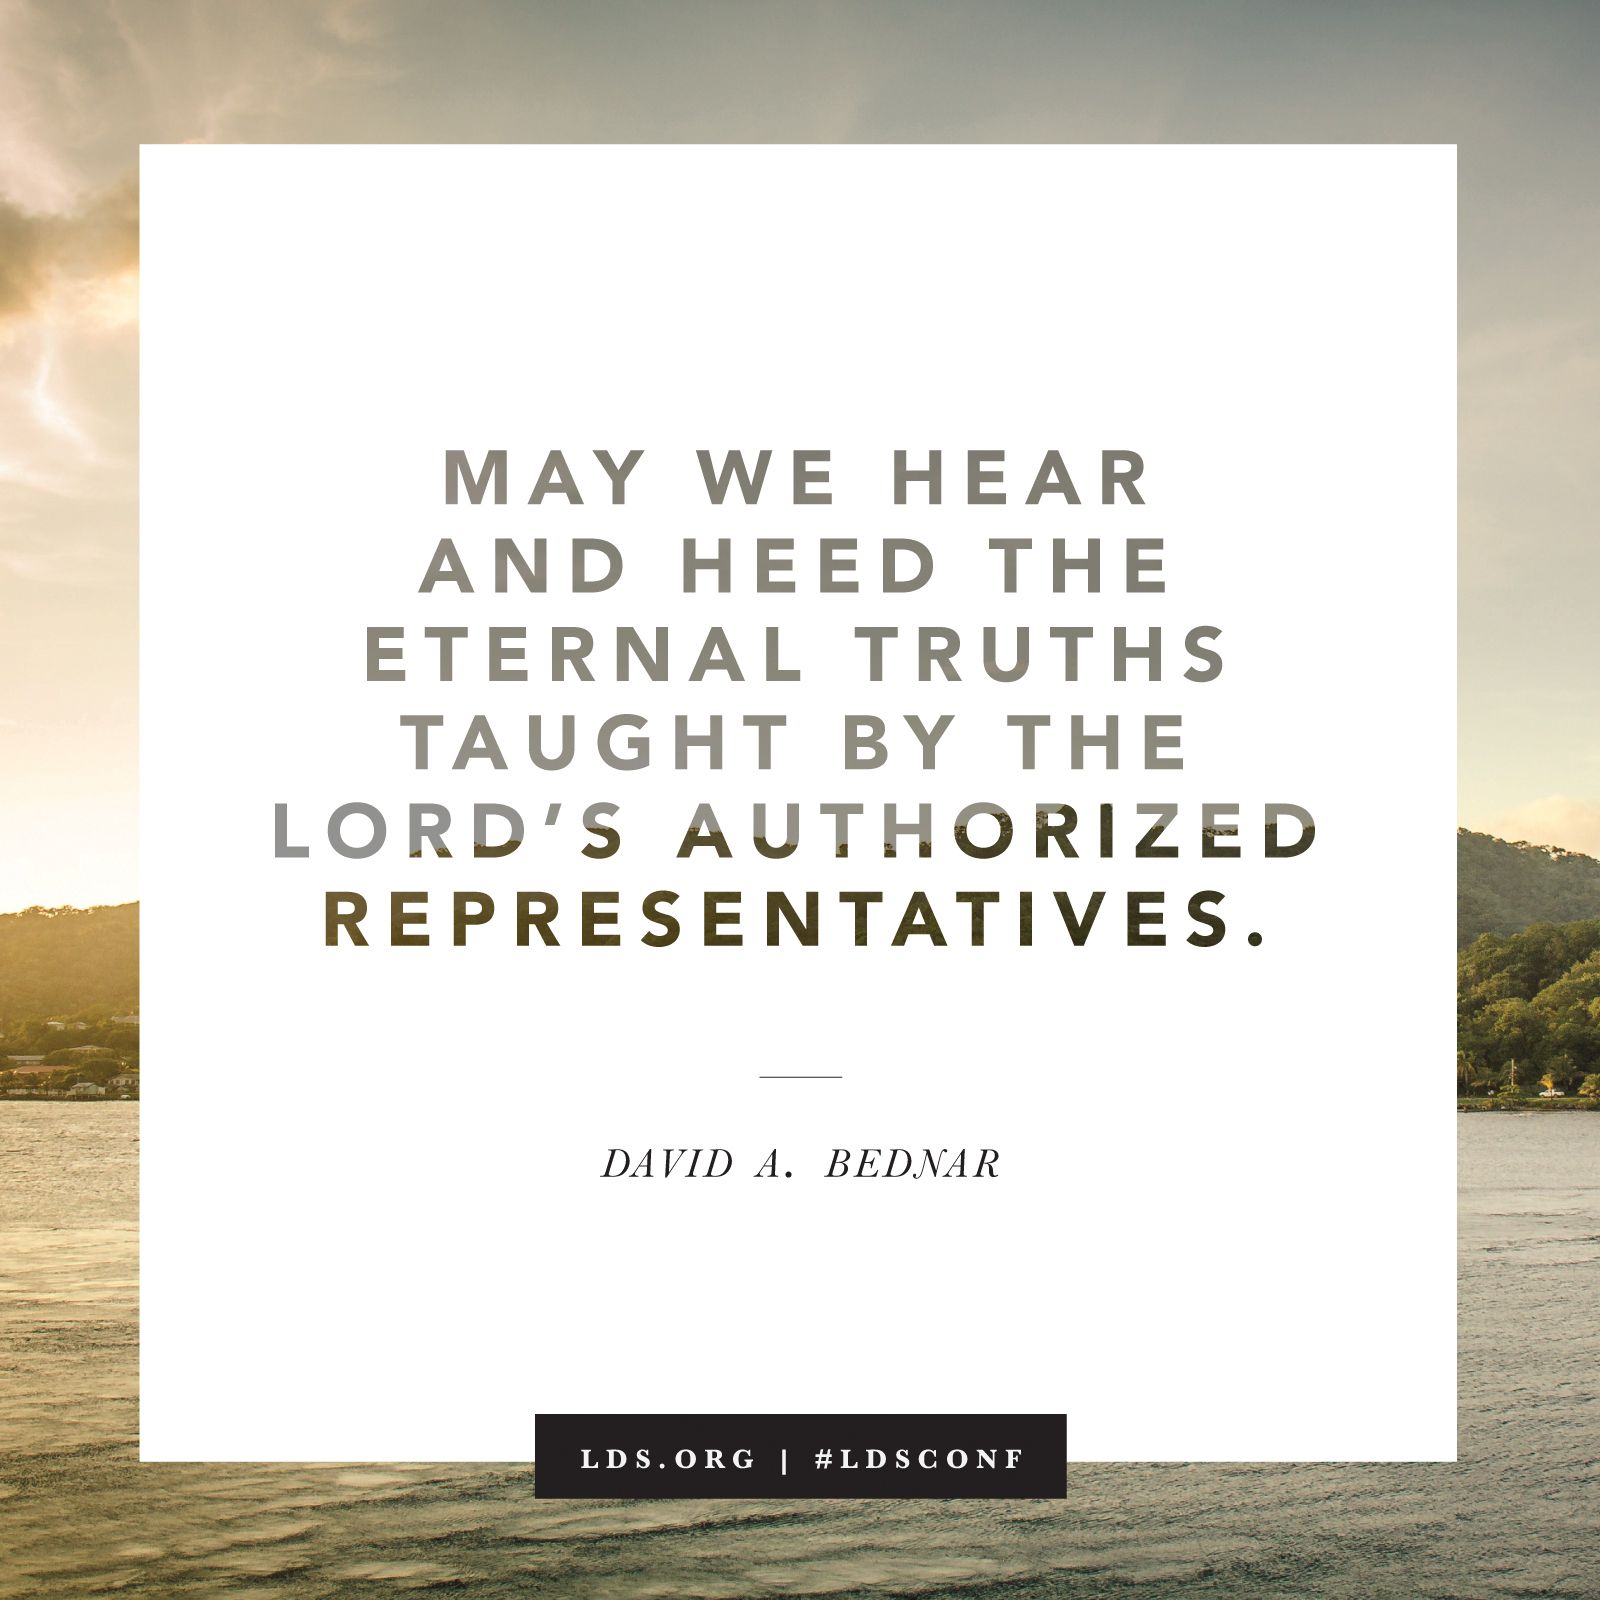 “May we hear and heed the eternal truths taught by the Lord’s authorized representatives.” —Elder David A. Bednar, “Chosen to Bear Testimony of My Name”